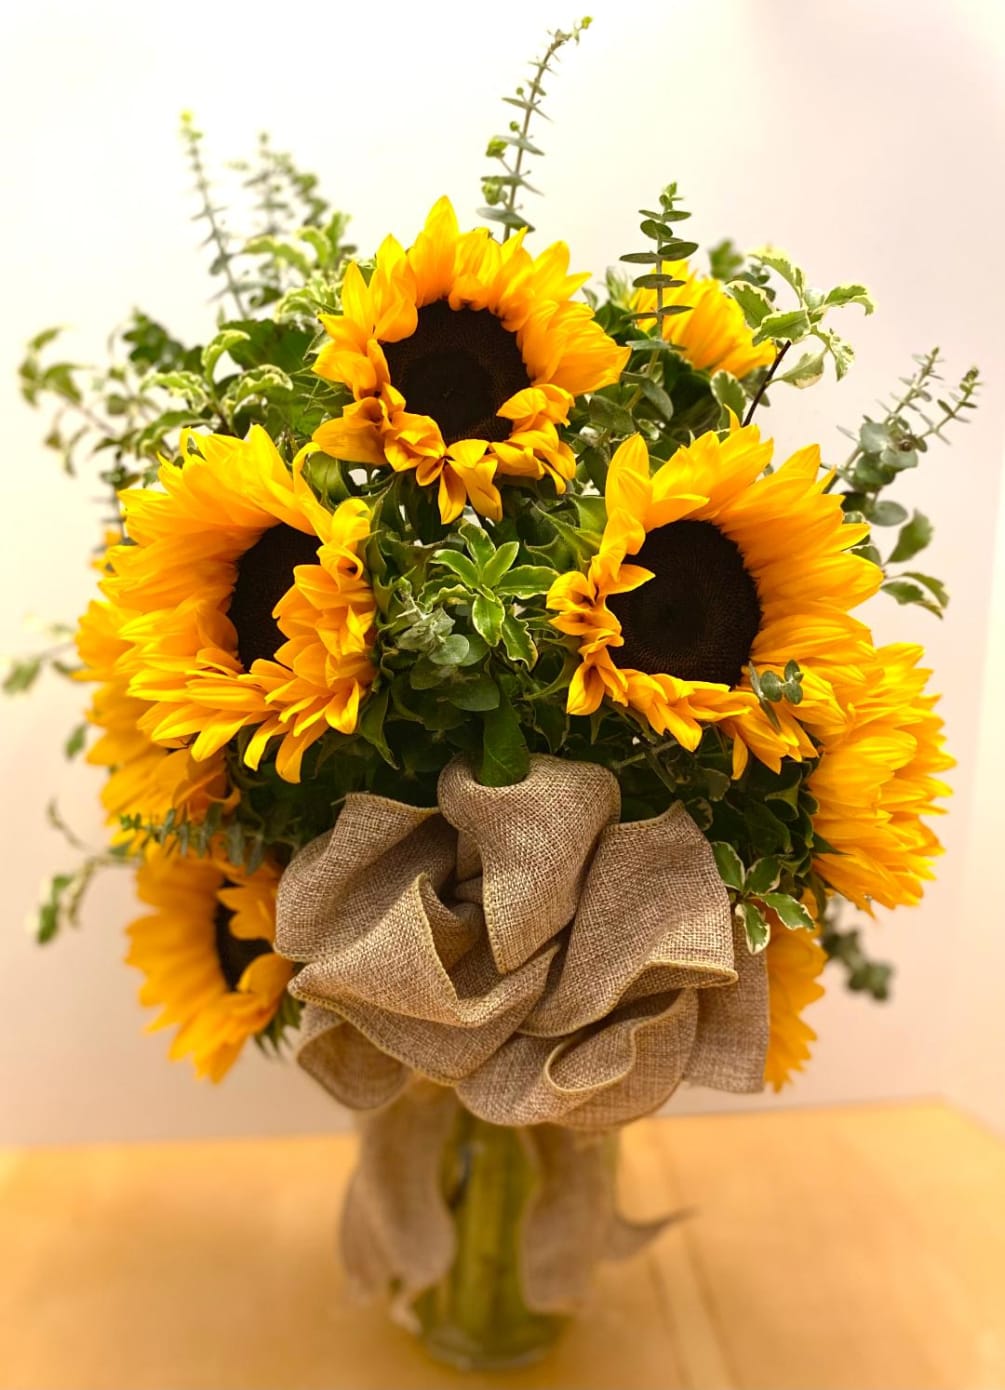 This warm and simple design includes a dozen Sunflowers nestled in Italian